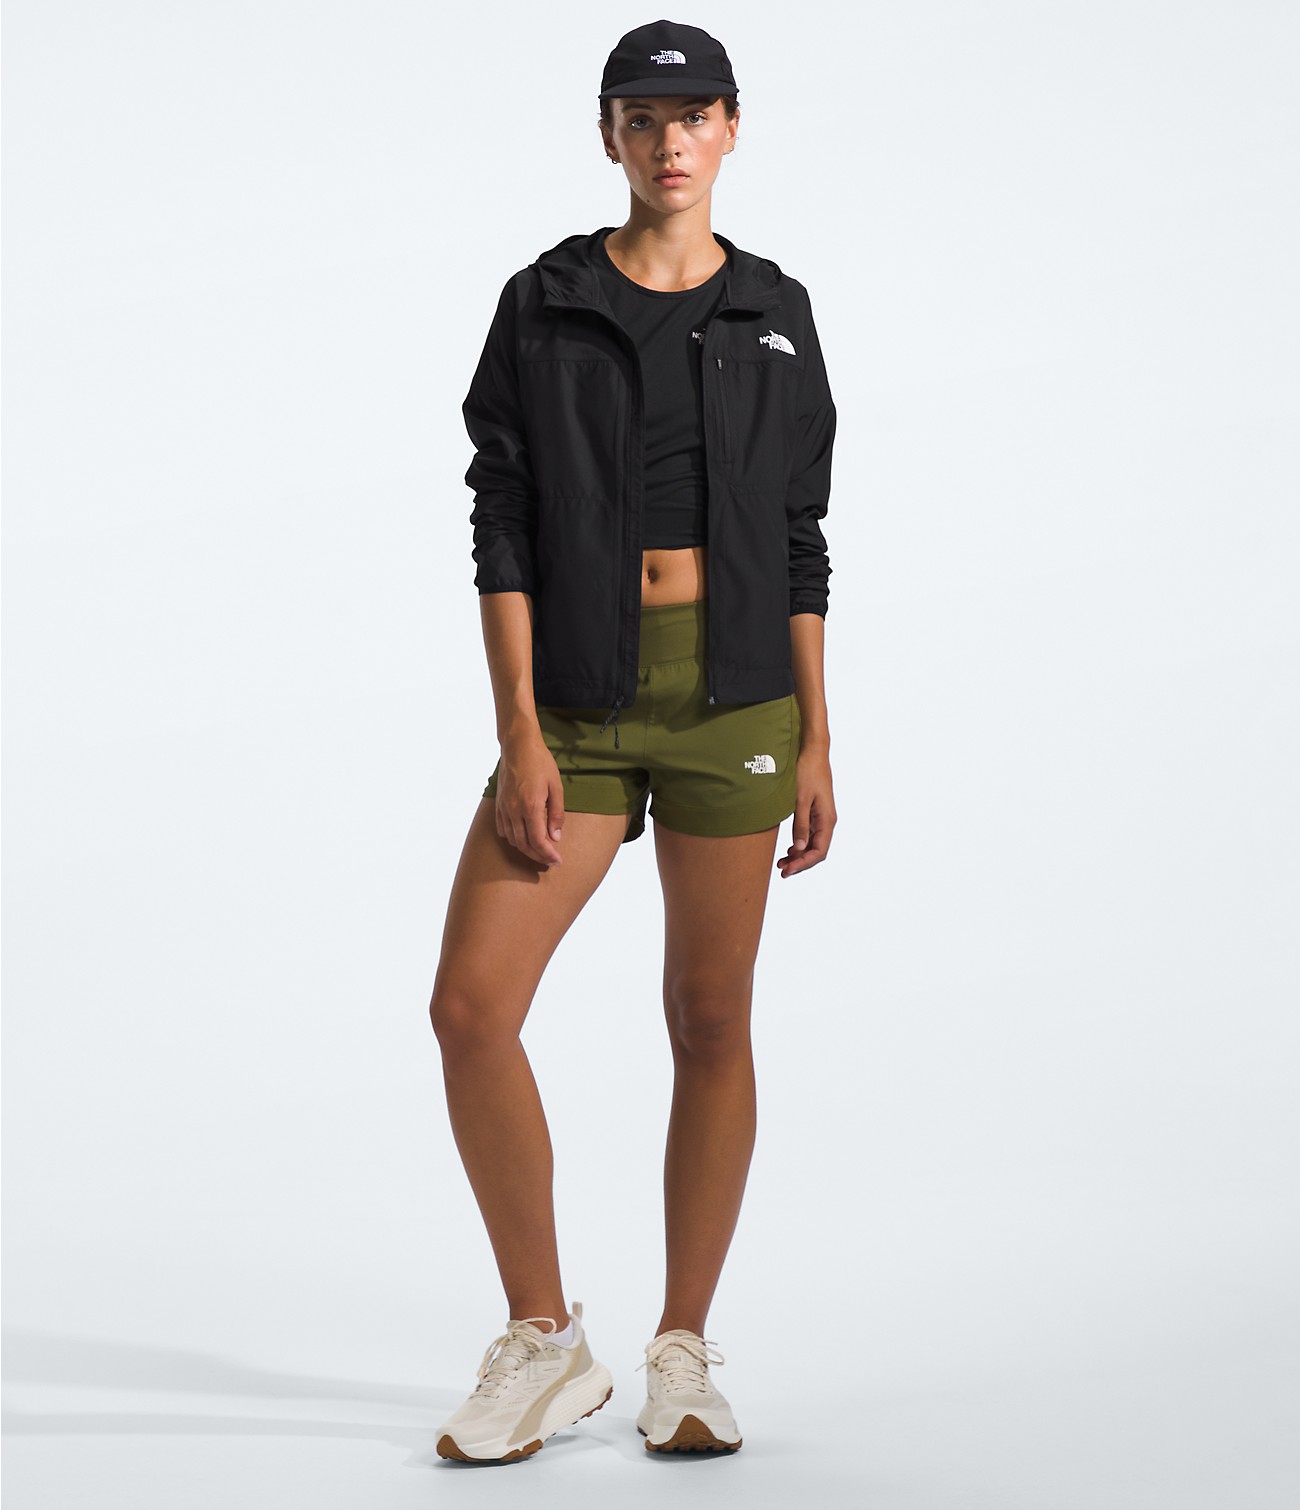 Women’s Higher Run Wind Jacket | The North Face